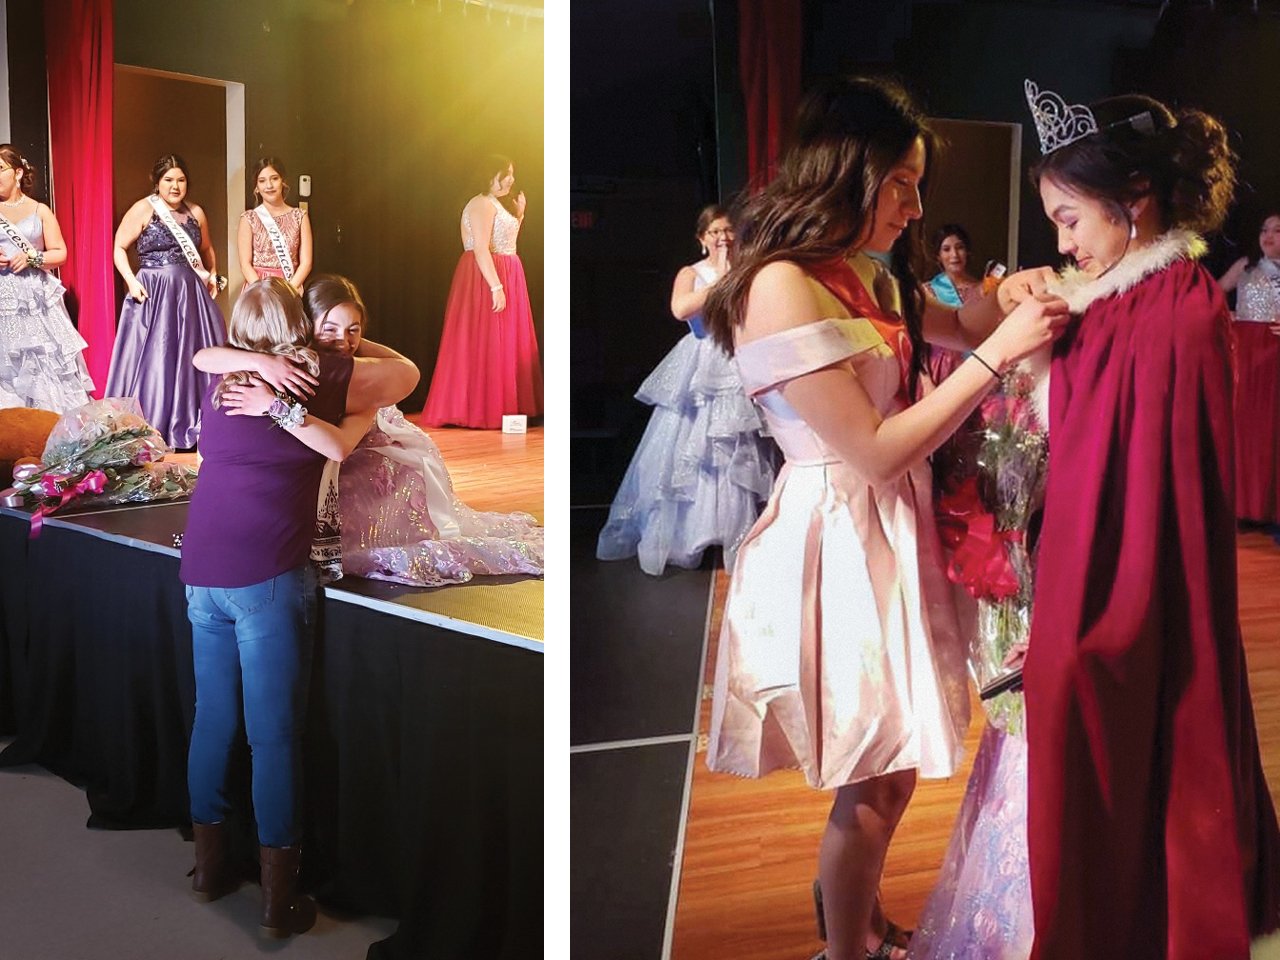 A photo of a teen Indigenous girl kneeling down on a stage to embrace her grandmother; an Indigenous teen girl pins a sash on another Indigenous teen girl.